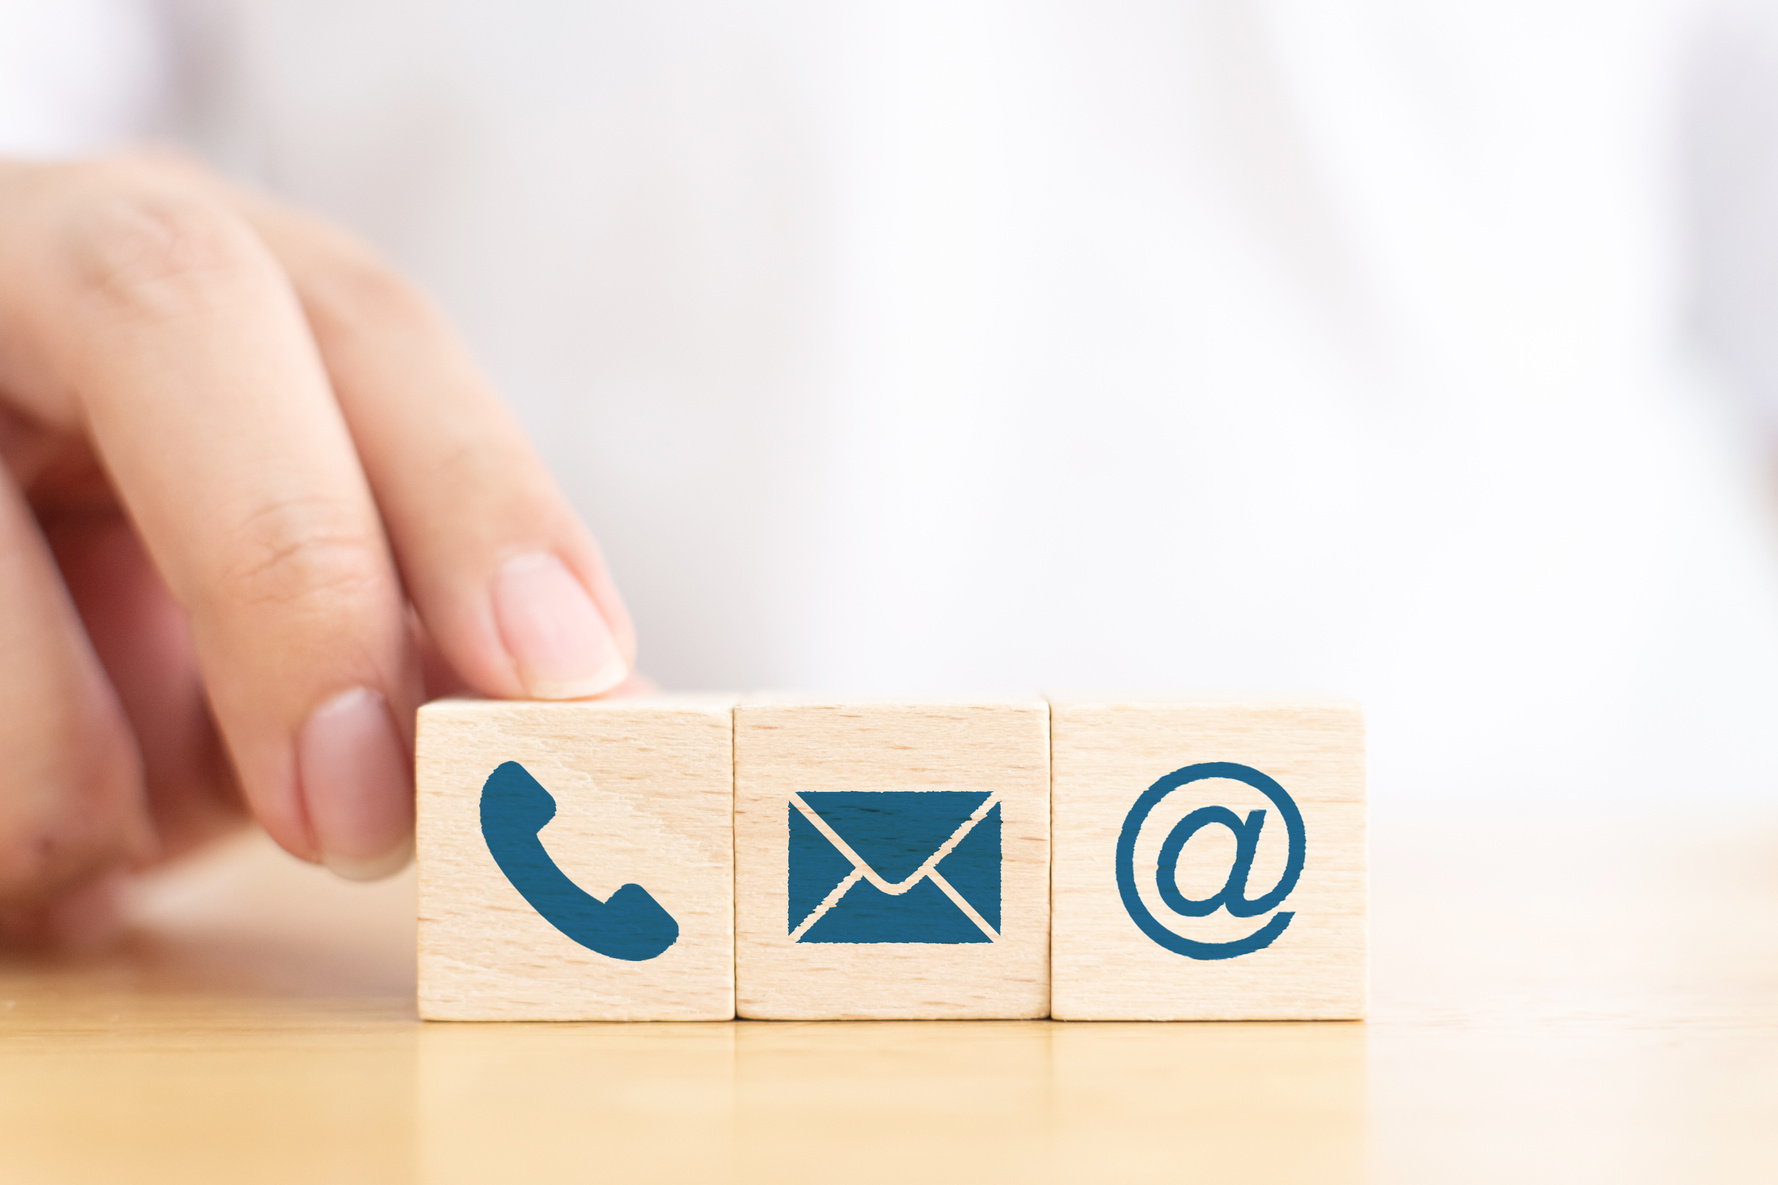 Businessman hand choose wooden block cube symbol icon telephone, envelope email and address sign. Website page contact us or e-mail marketing concept